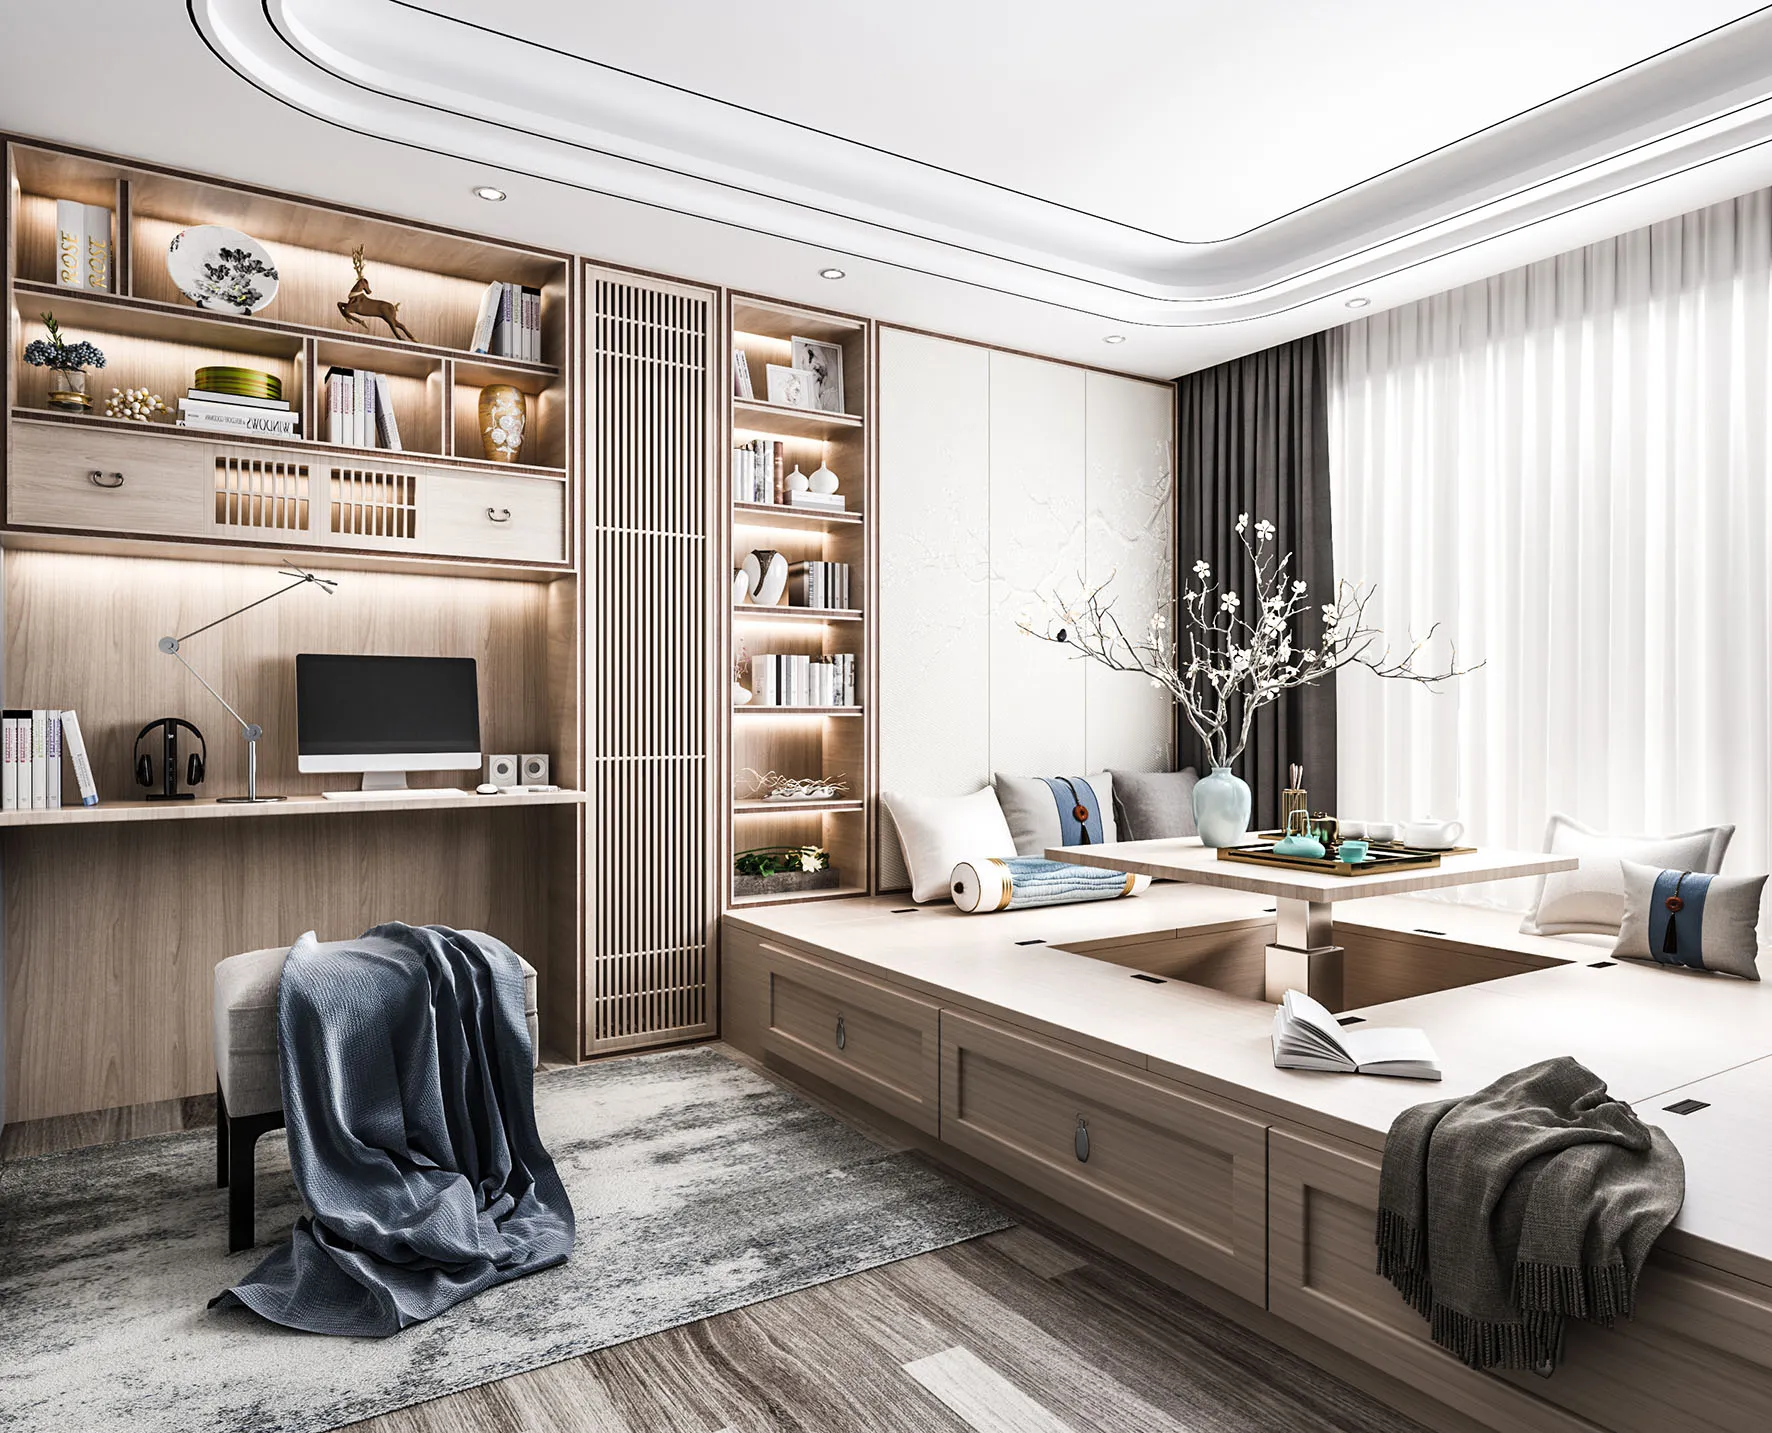 INTERIOR 3D SCENES – CHINESE STYLE – 0035